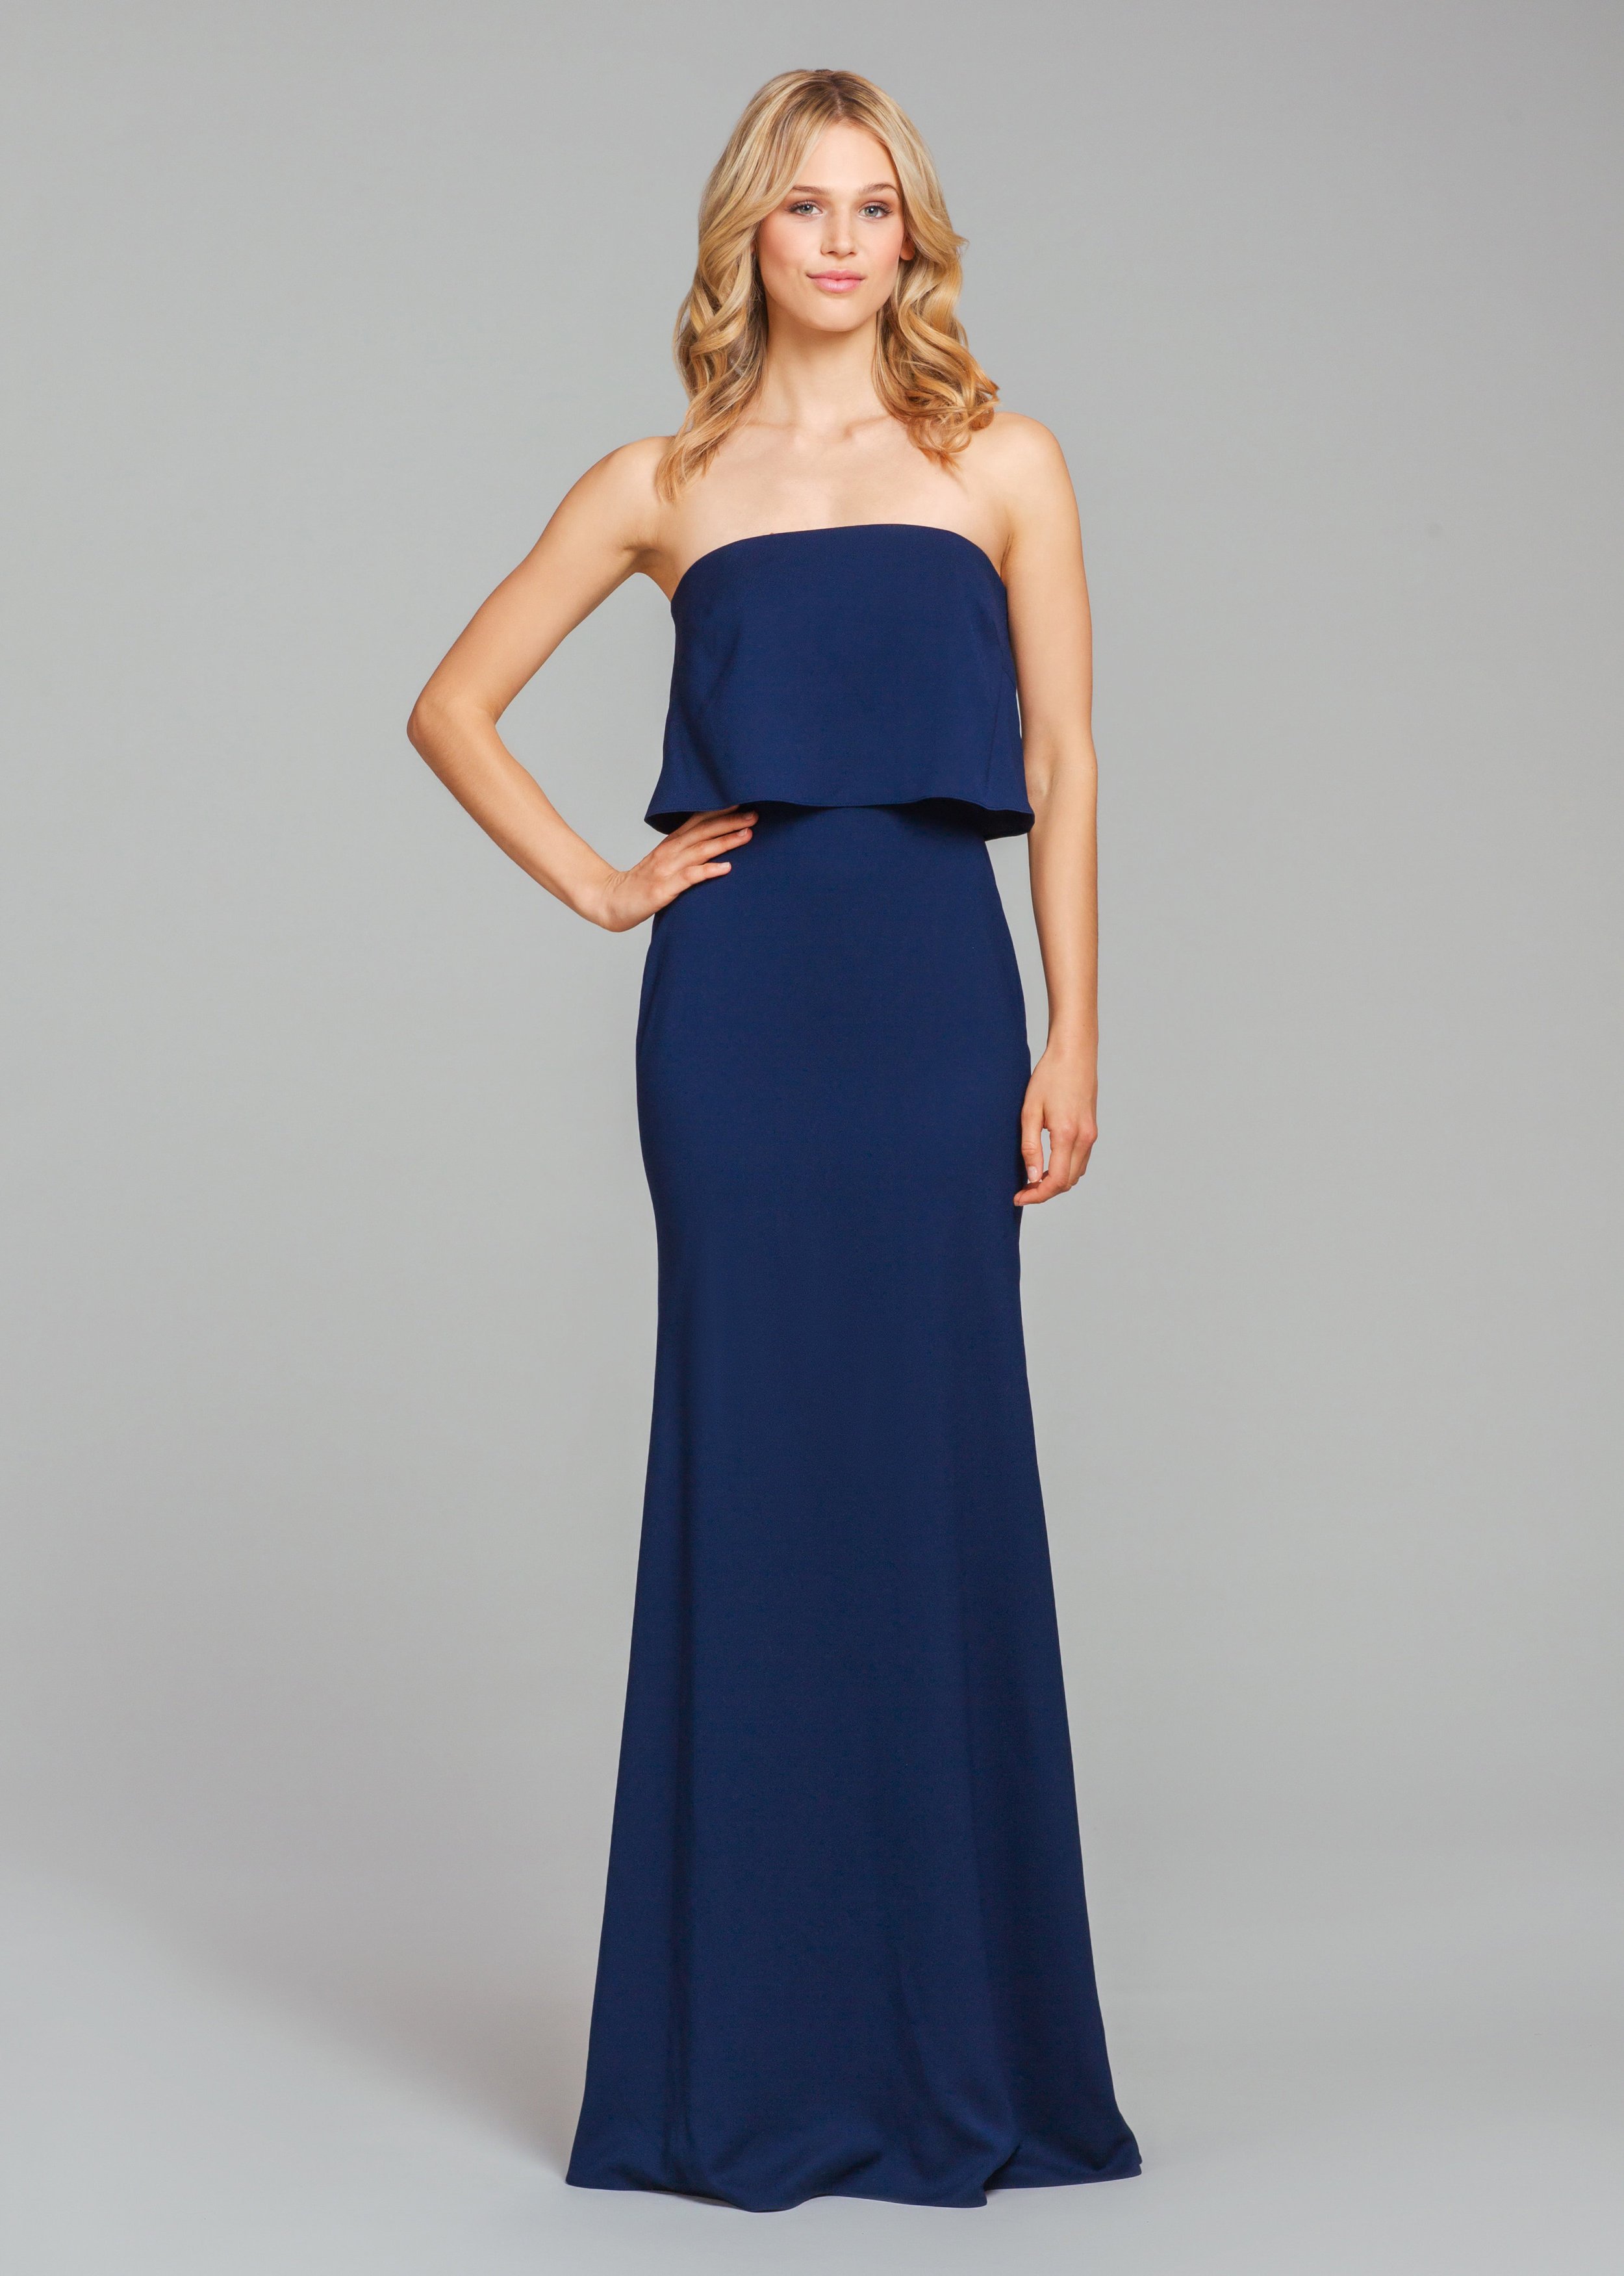 hayley-paige-occasions-bridesmaids-fall-2018-style-5860.jpg